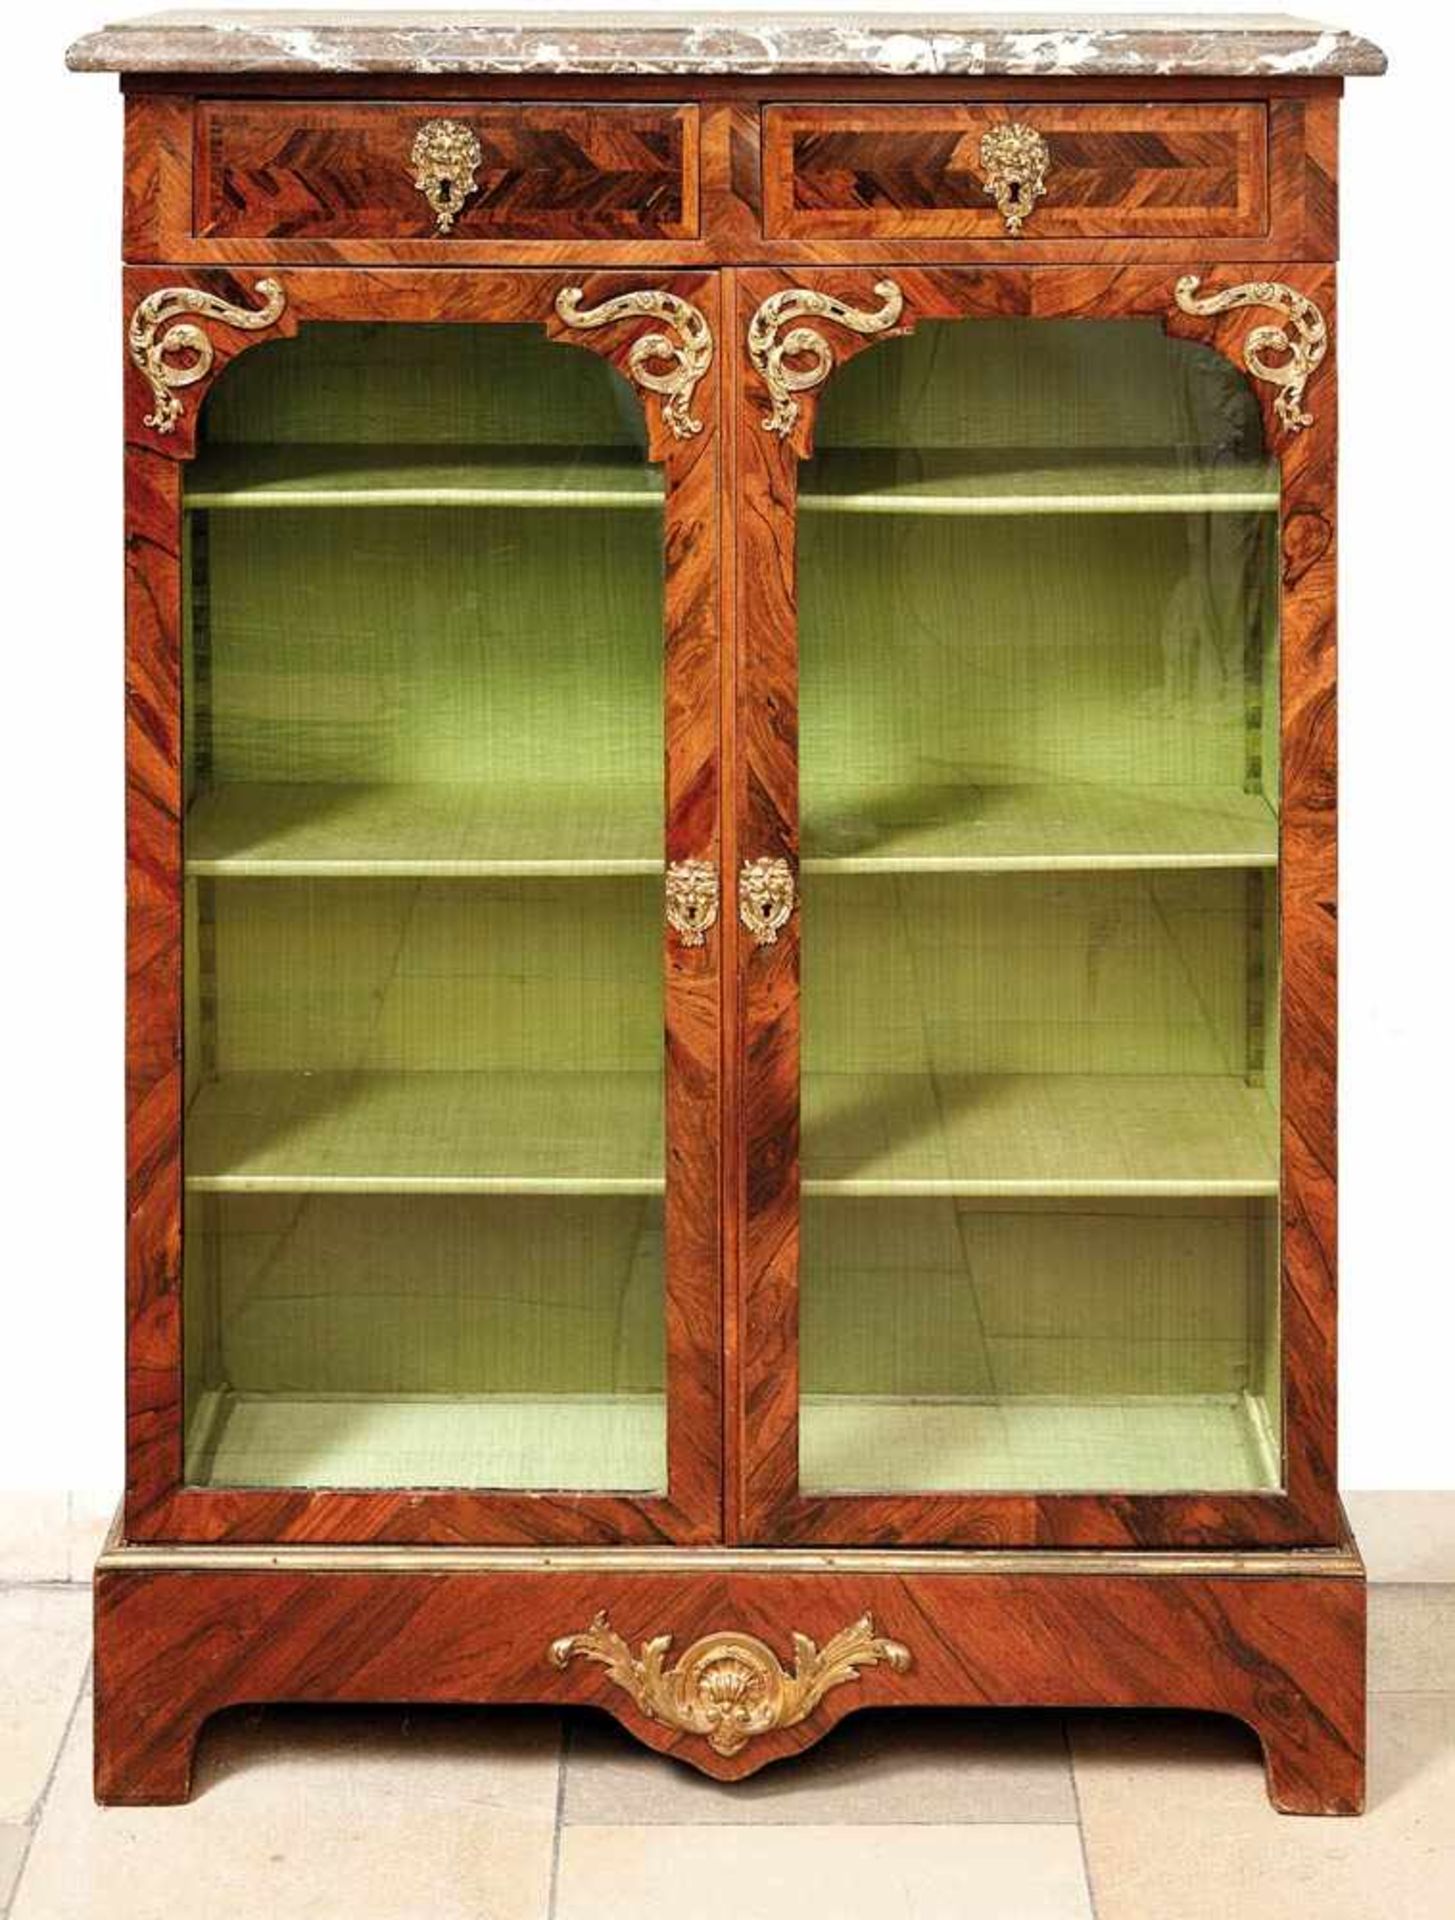 Small Regency display caseFrance, 1st half 18th c.Rectangular corpus with two glazed doors and